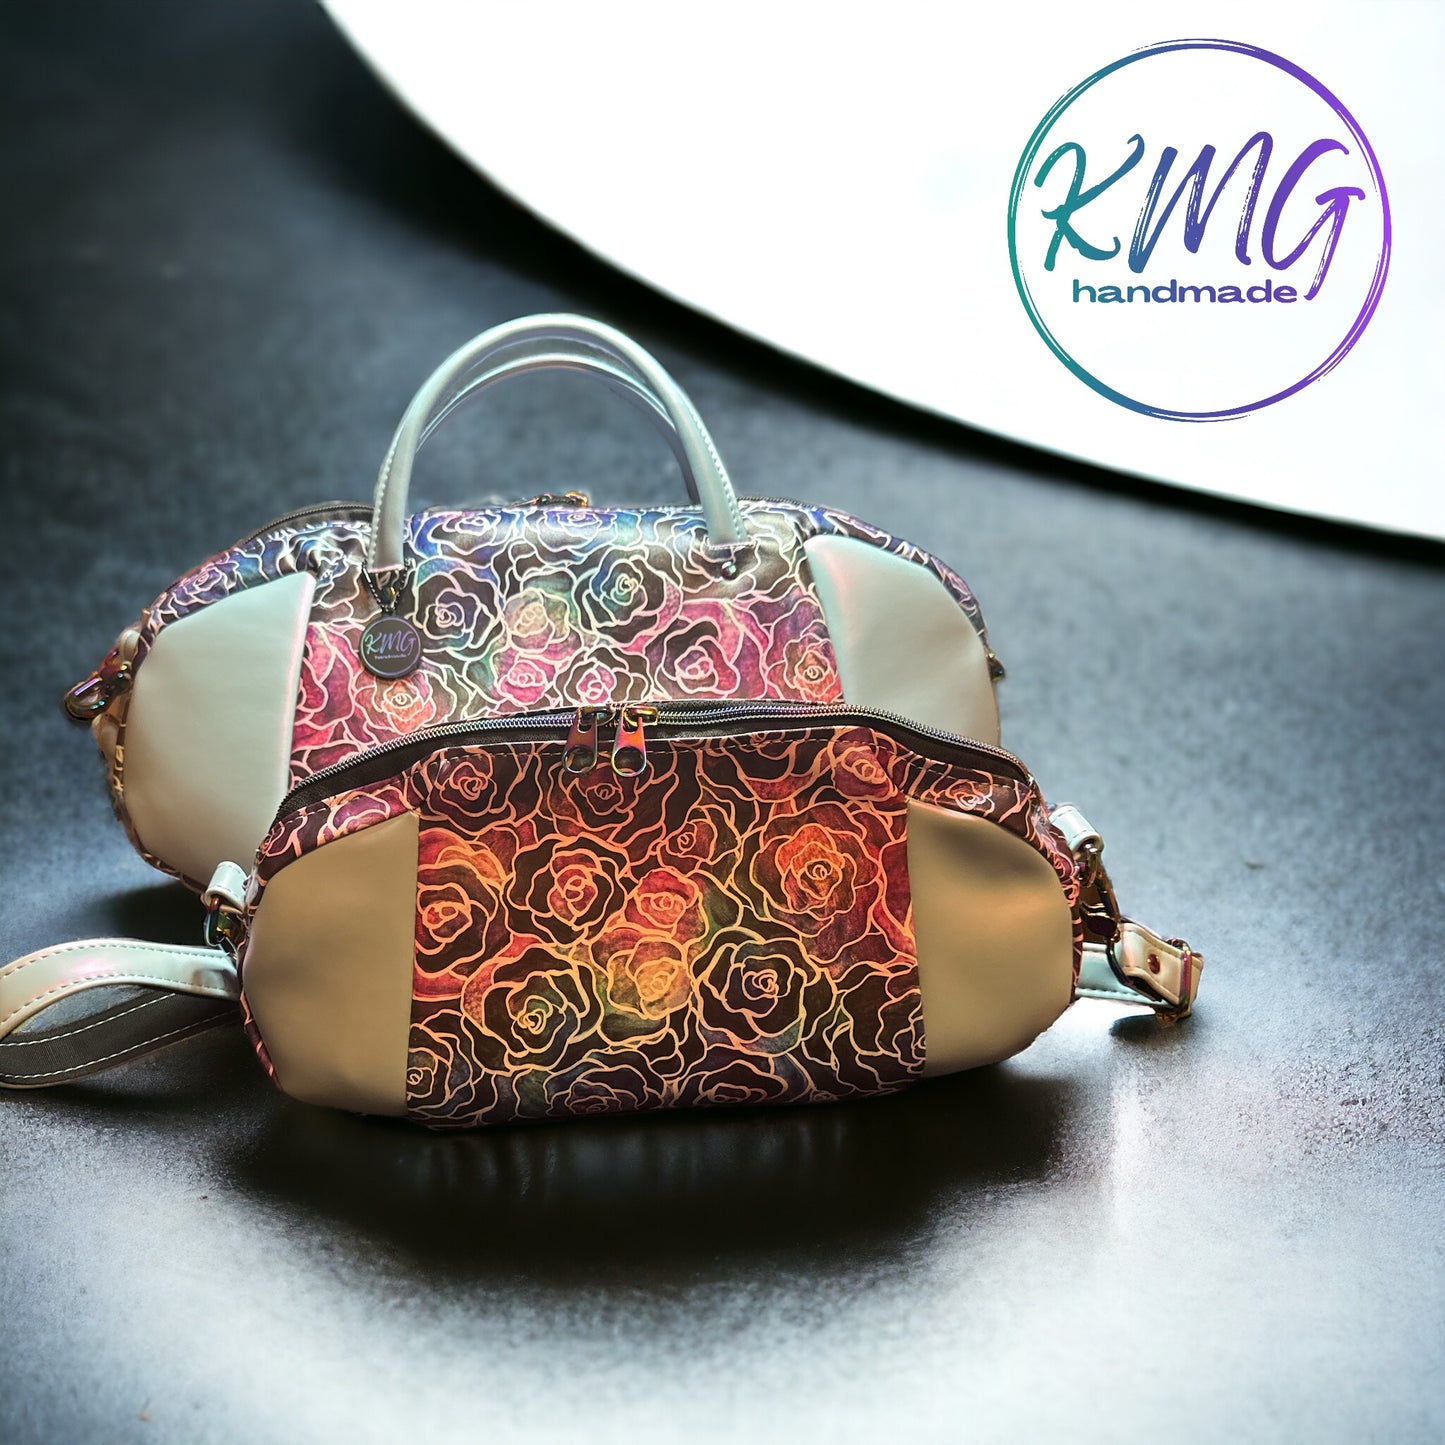 PDF Pattern and Video Tutorial - The Carryall Bag by KMGhandmade